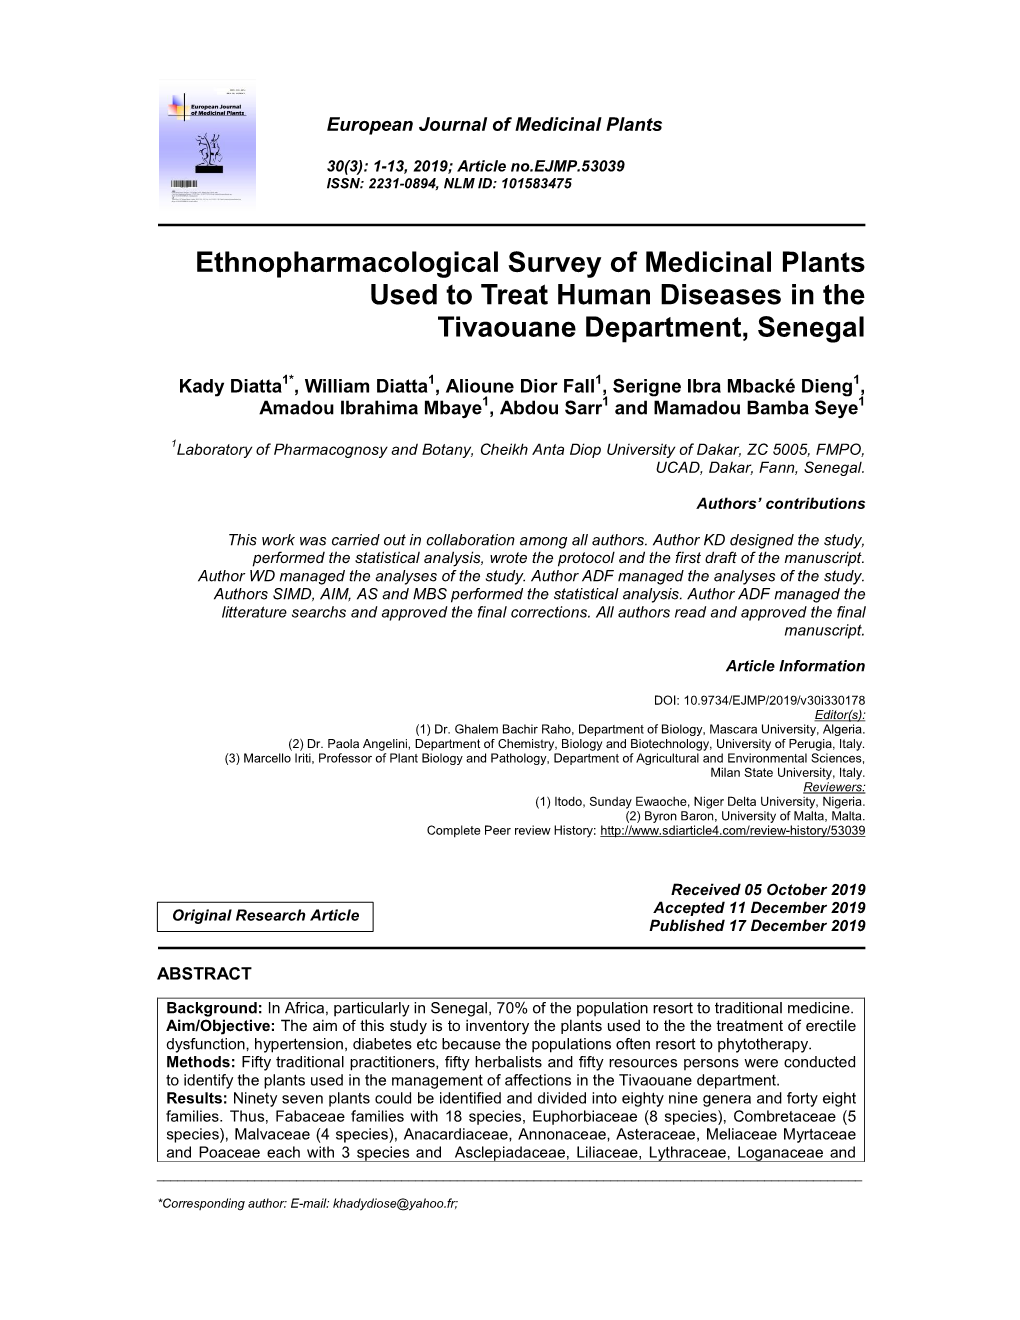 Ethnopharmacological Survey of Medicinal Plants Used to Treat Human Diseases in the Tivaouane Department, Senegal